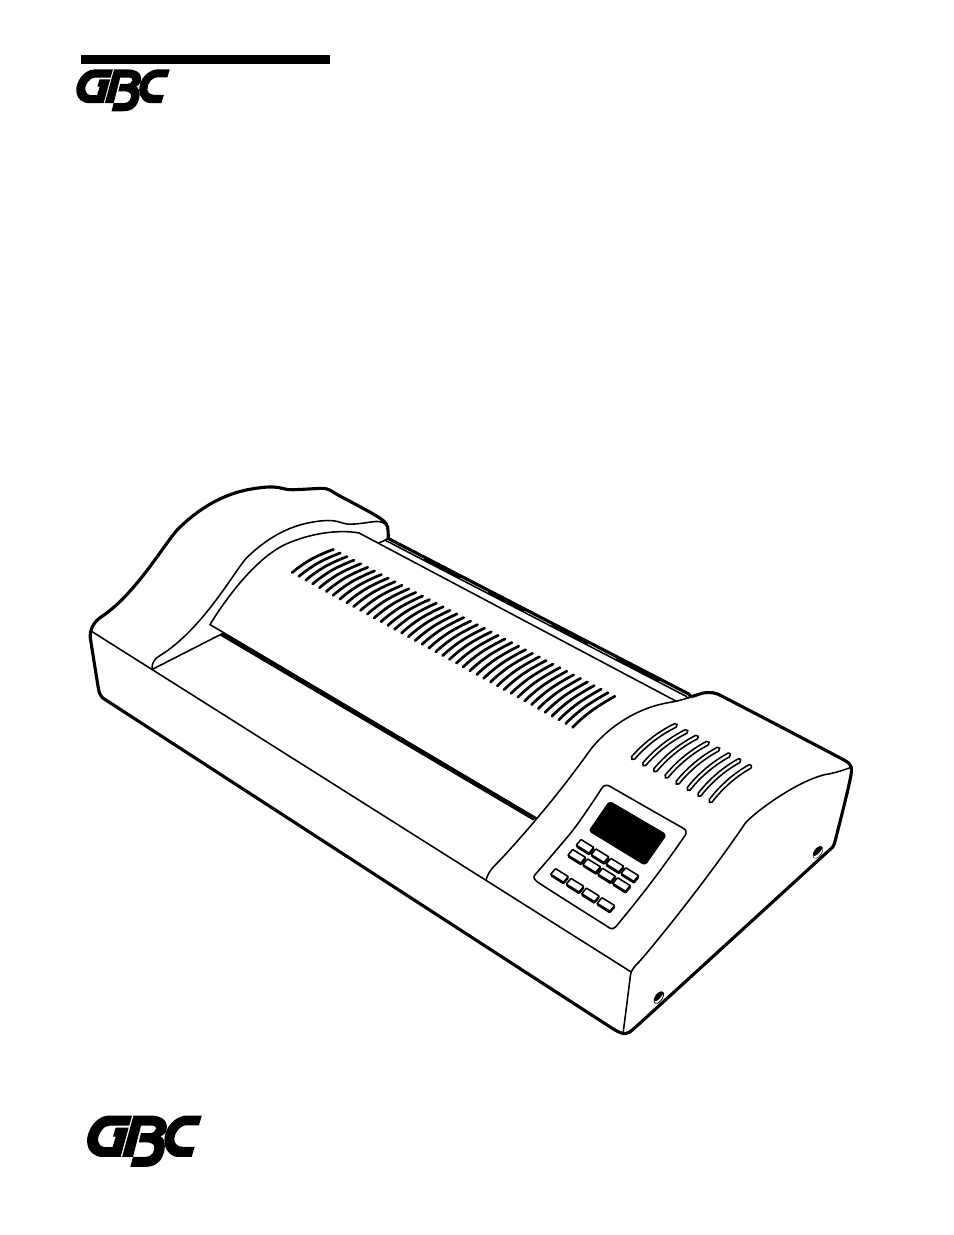 GBC H600 Heatseal Laminator User Manual | 8 pages | Also for: 13 PRO